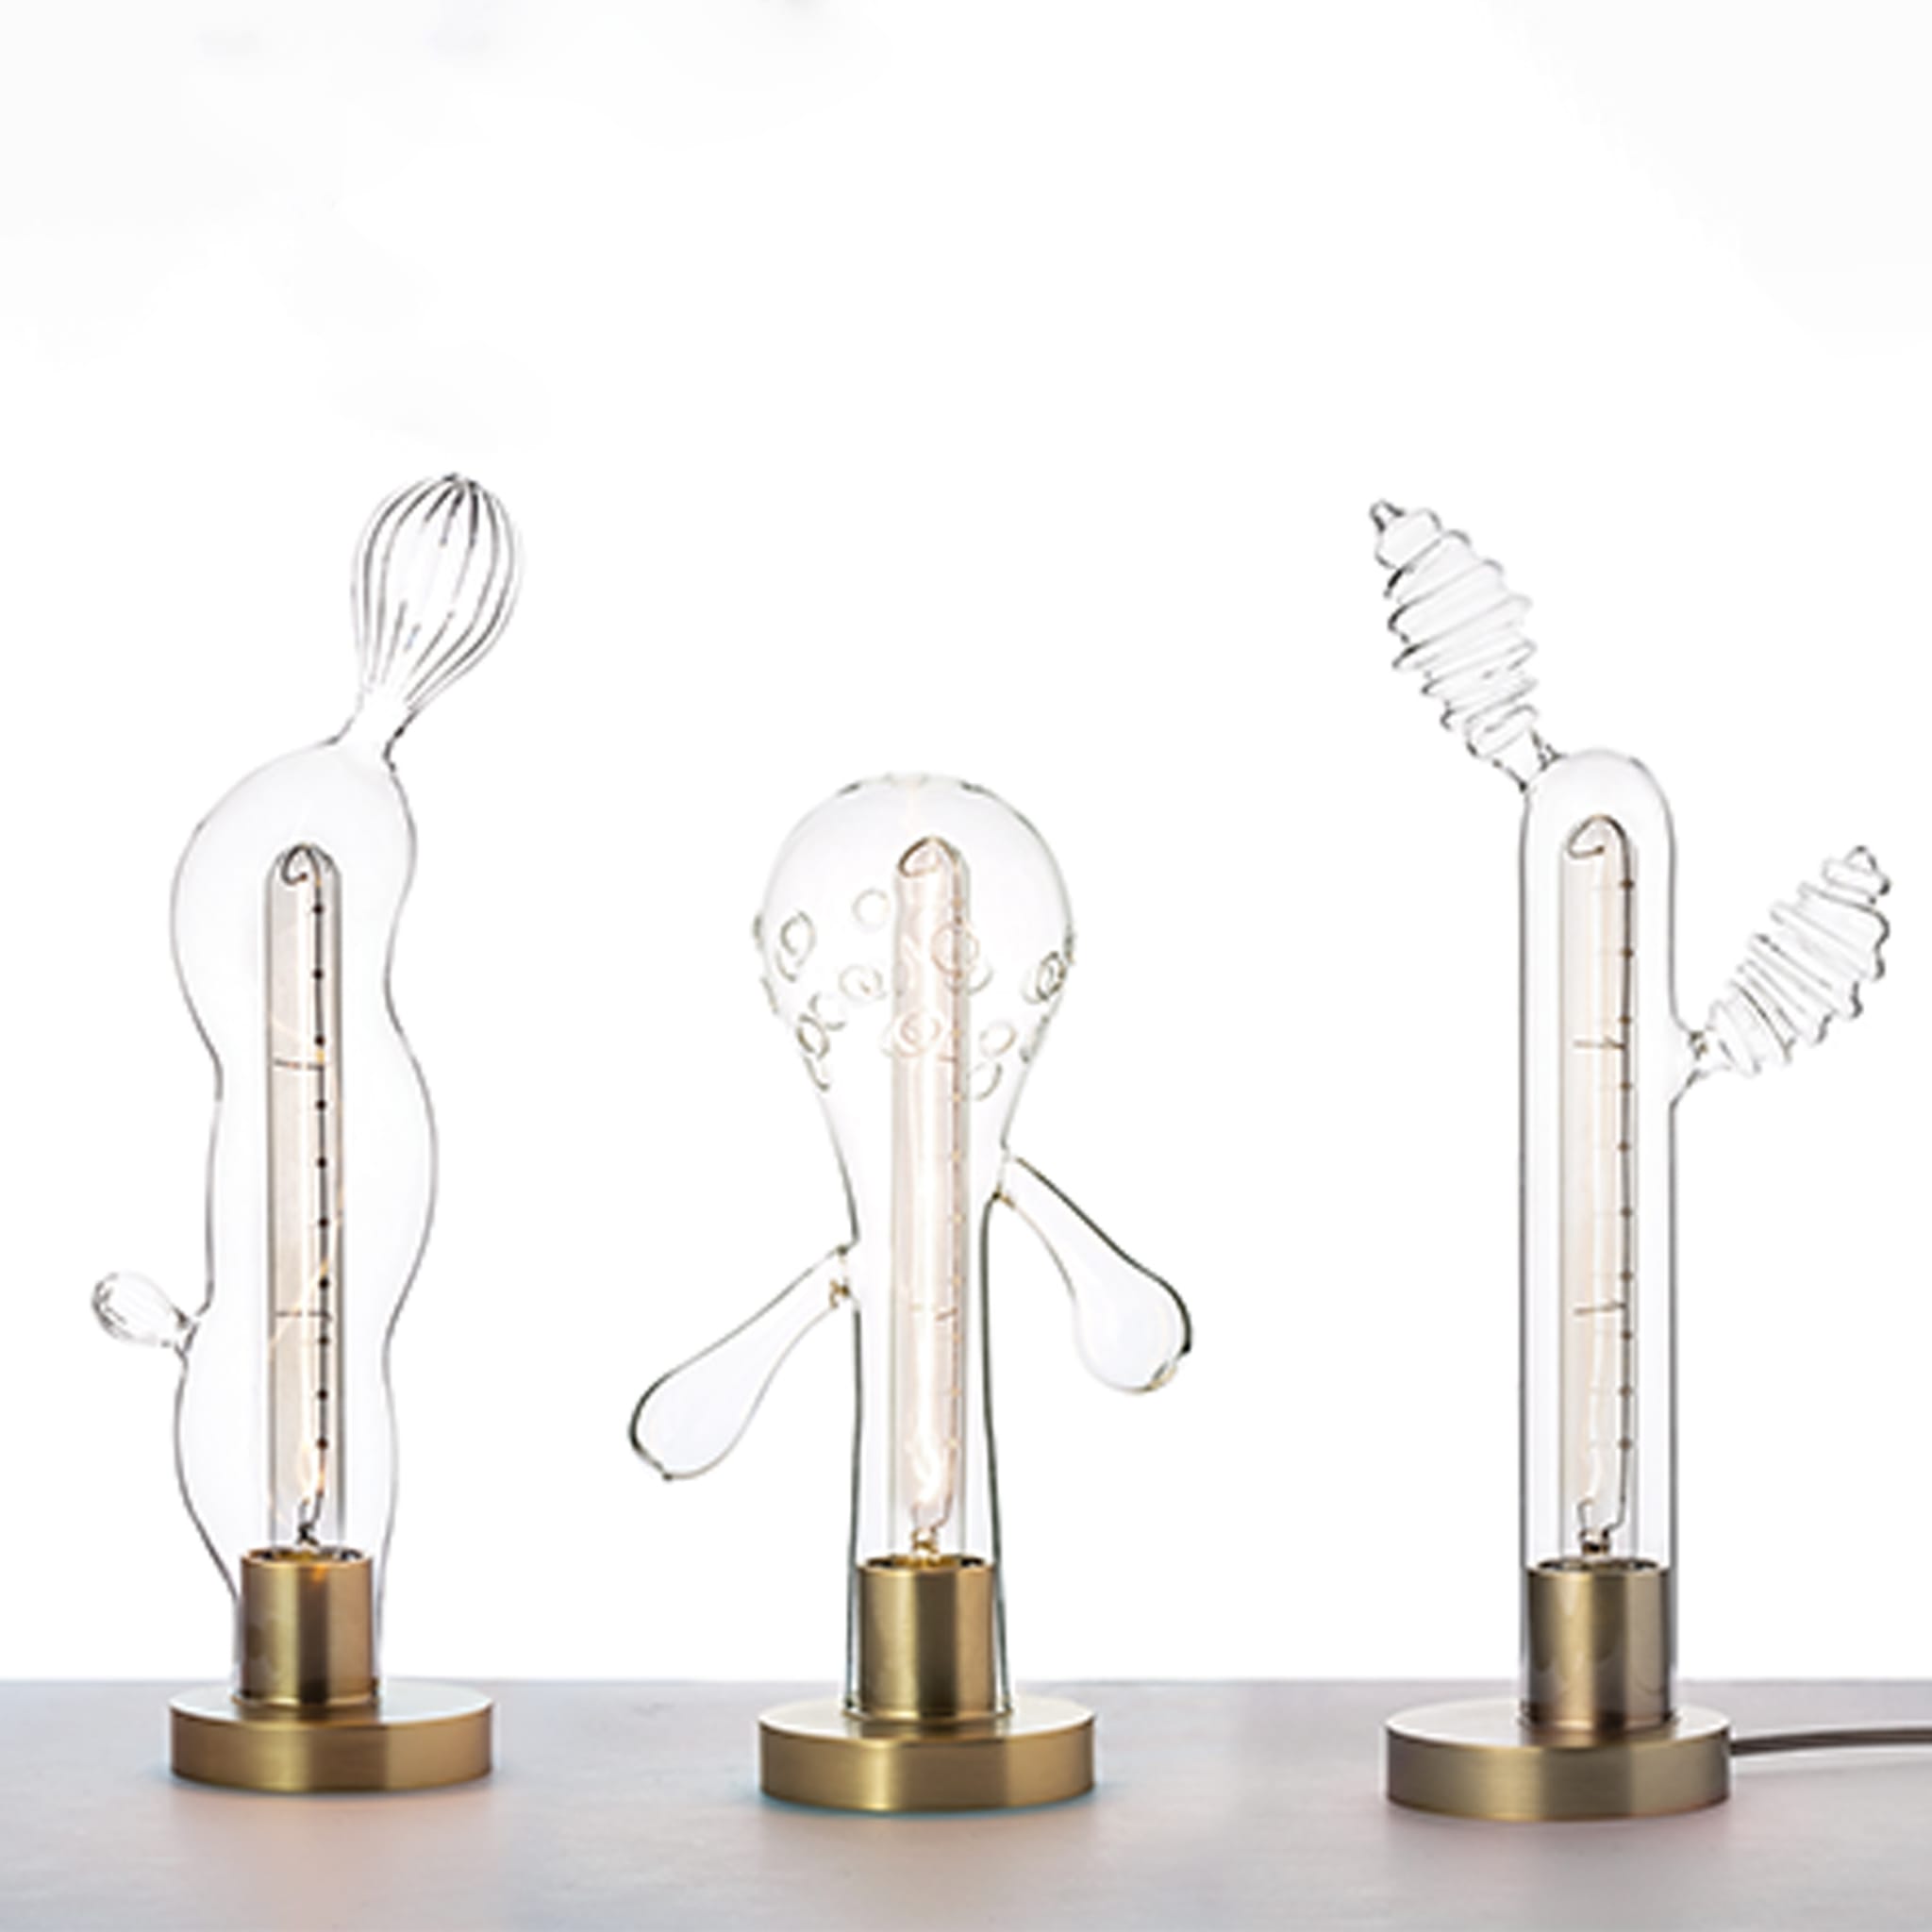 Transgenic Lights Table Lamps By Matteo Cibic #3 - Alternative view 1